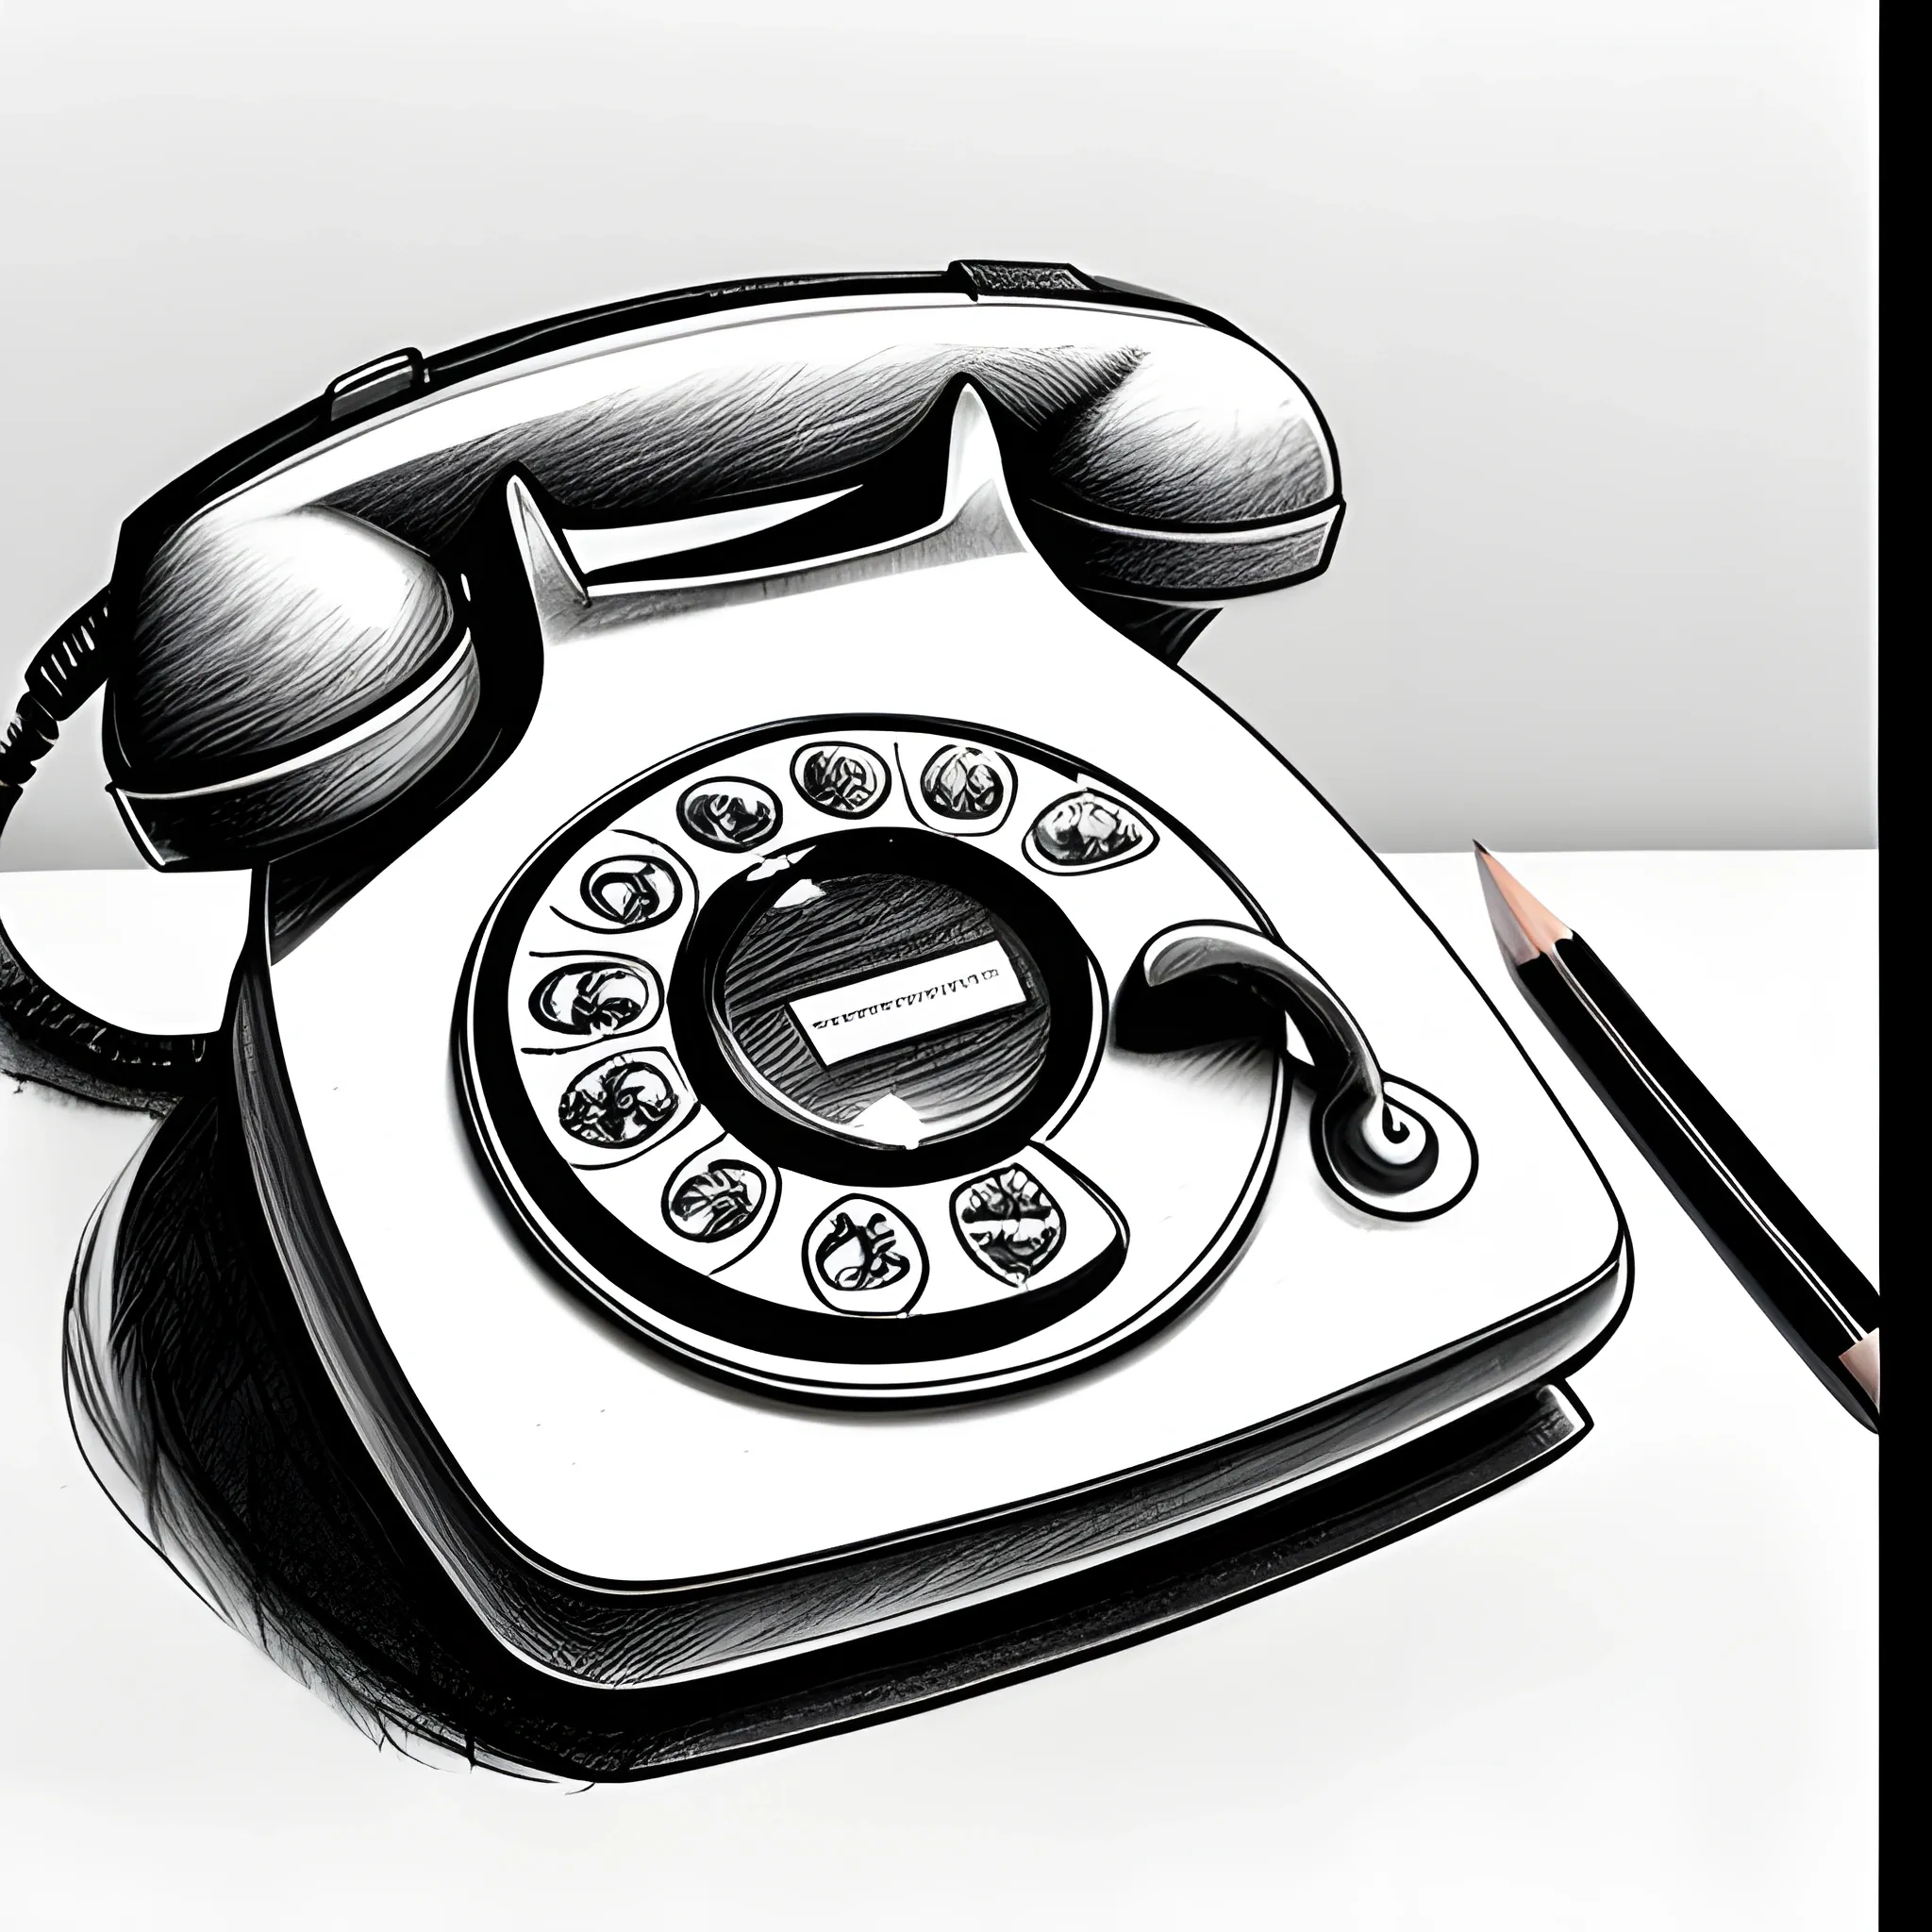 Sketch office telephone business phone Royalty Free Vector